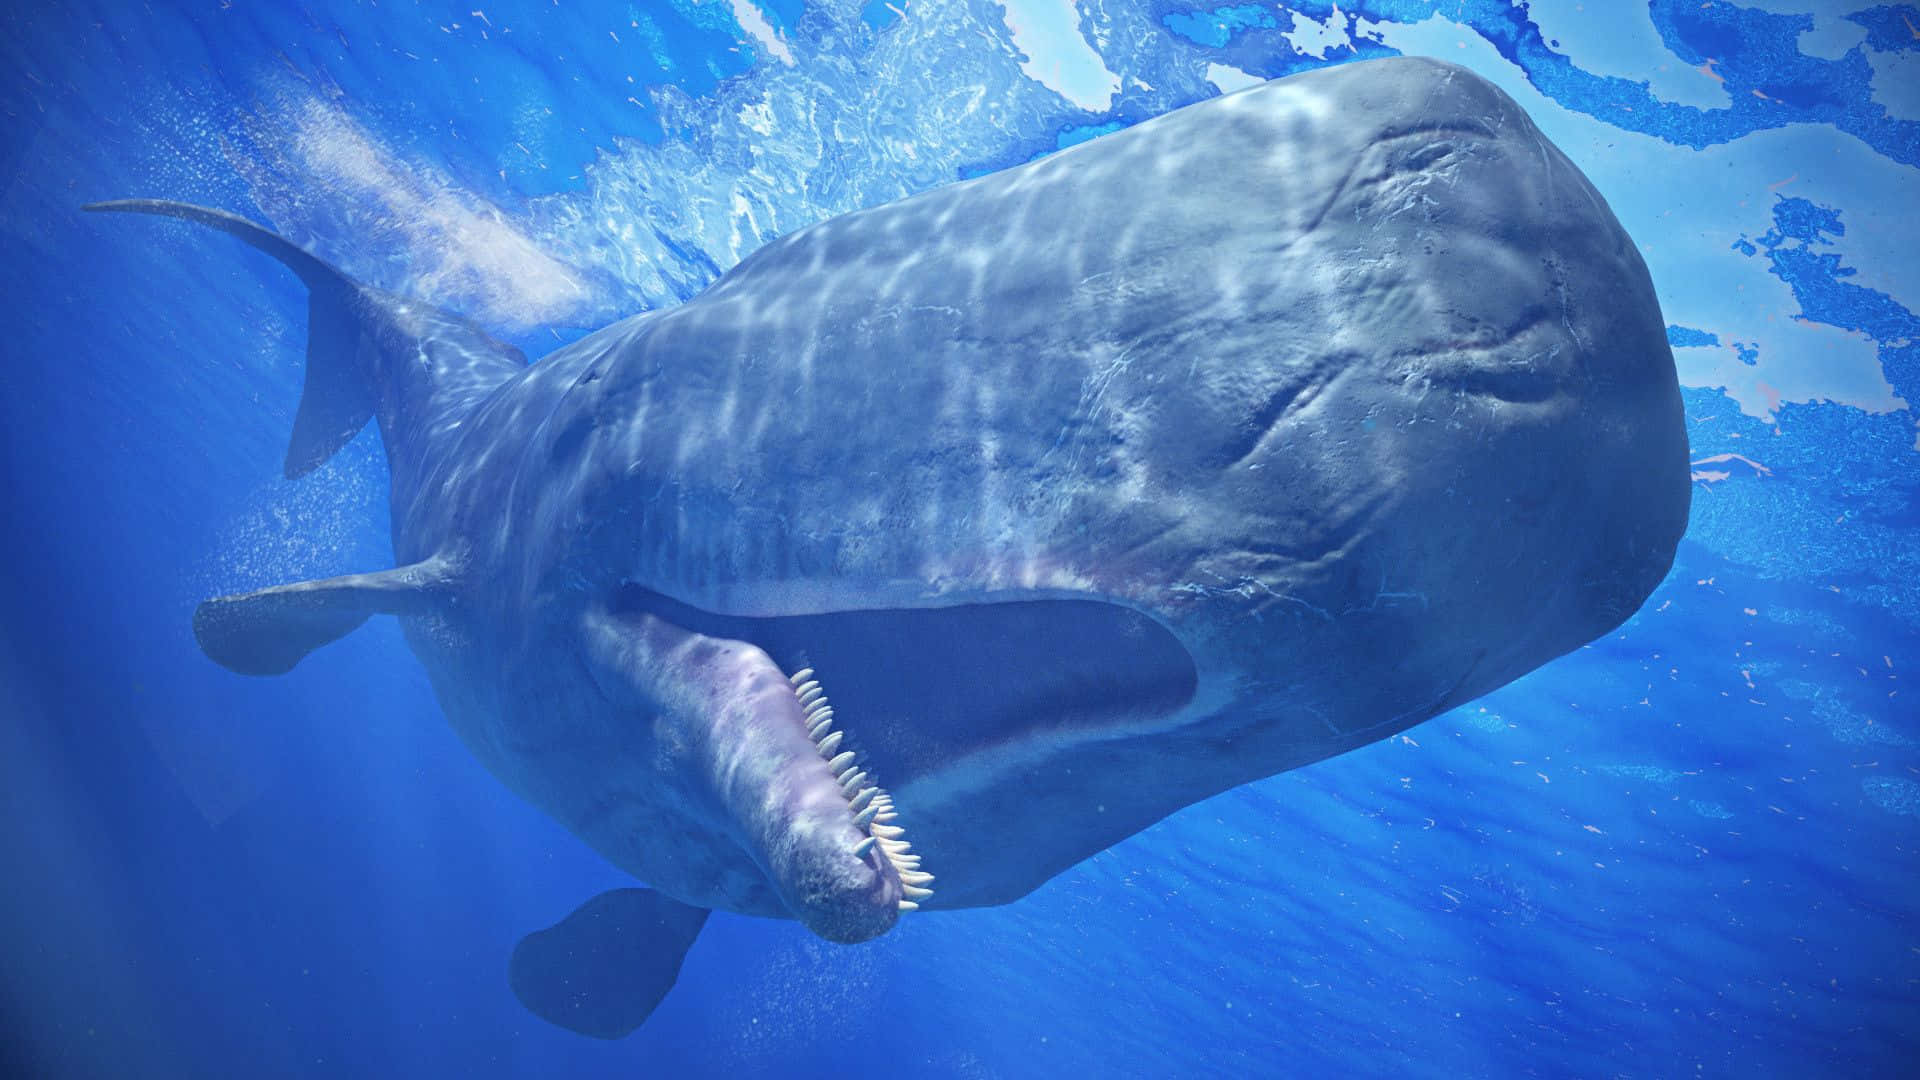 An intimidating Sperm Whale in the Transparent Sea